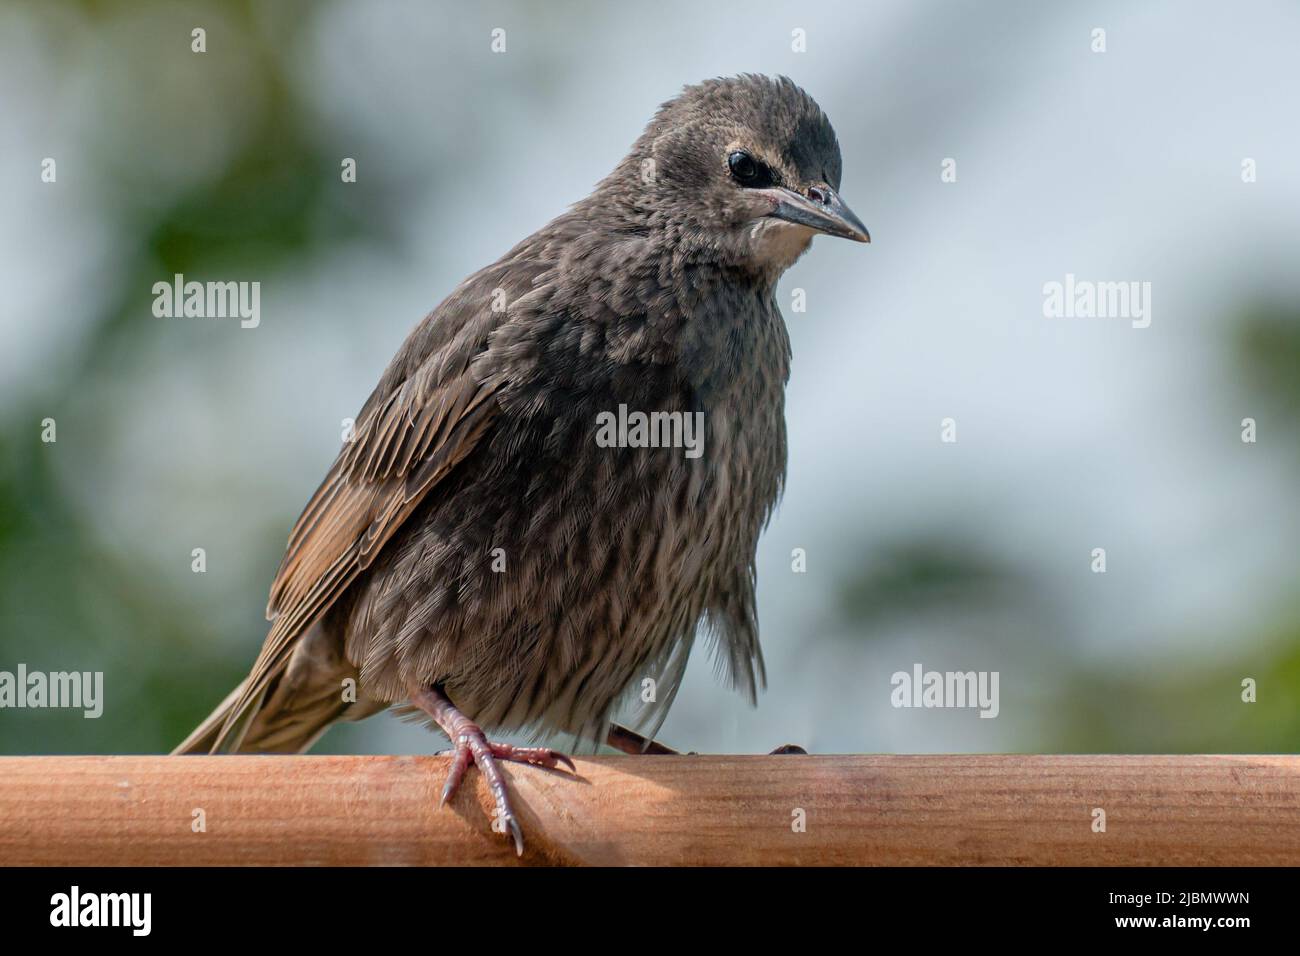 Juvenile fledgling starling with fluffed up down feathers on wooden bird feeder Stock Photo